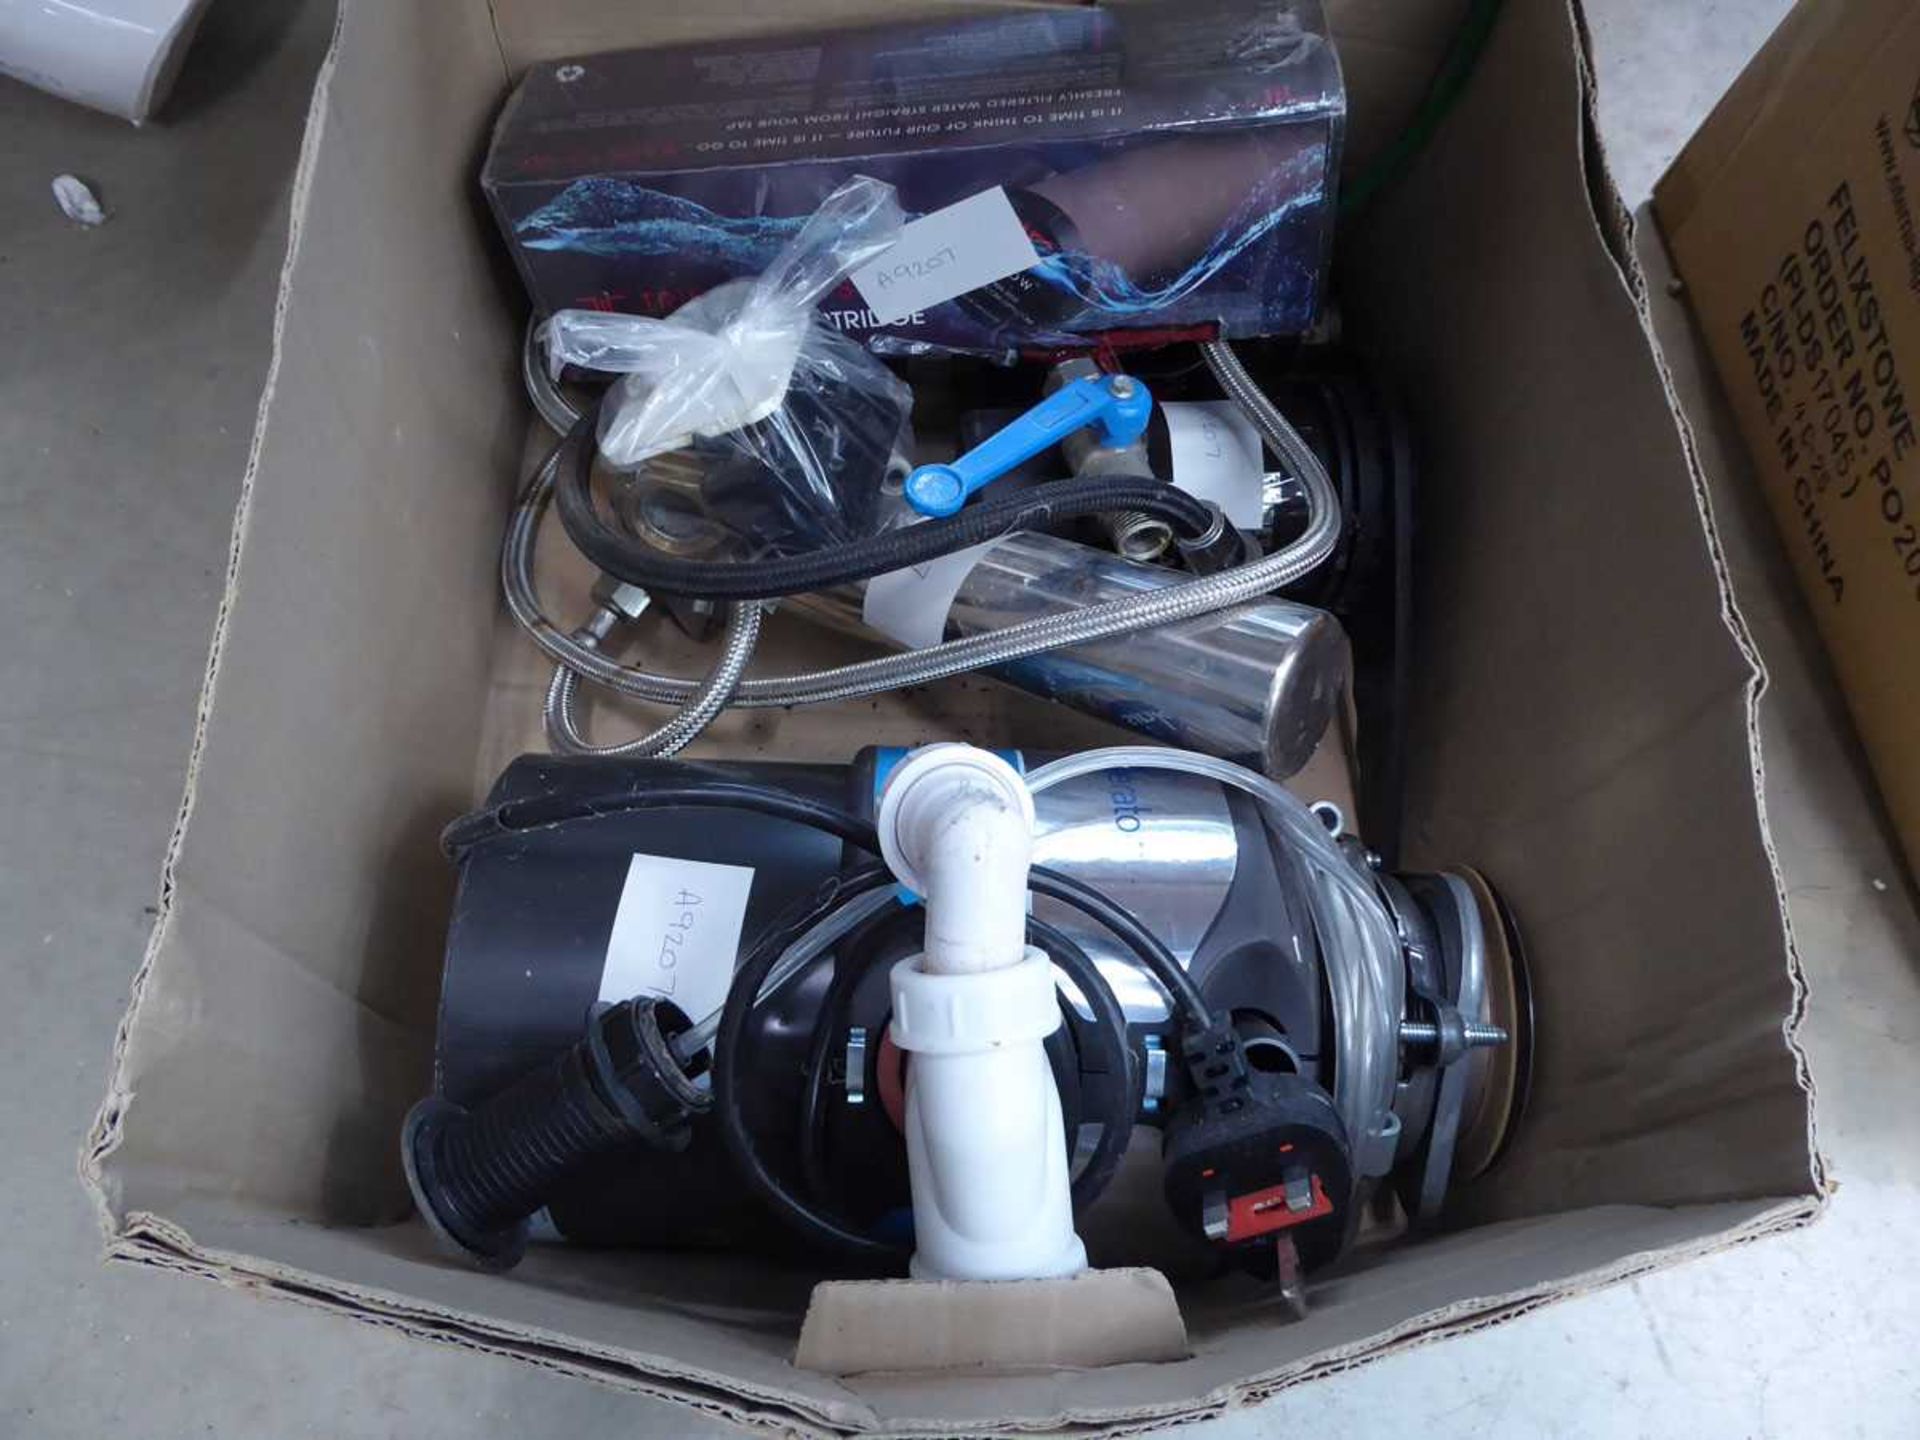 Box containing a macerator and other plumbing items